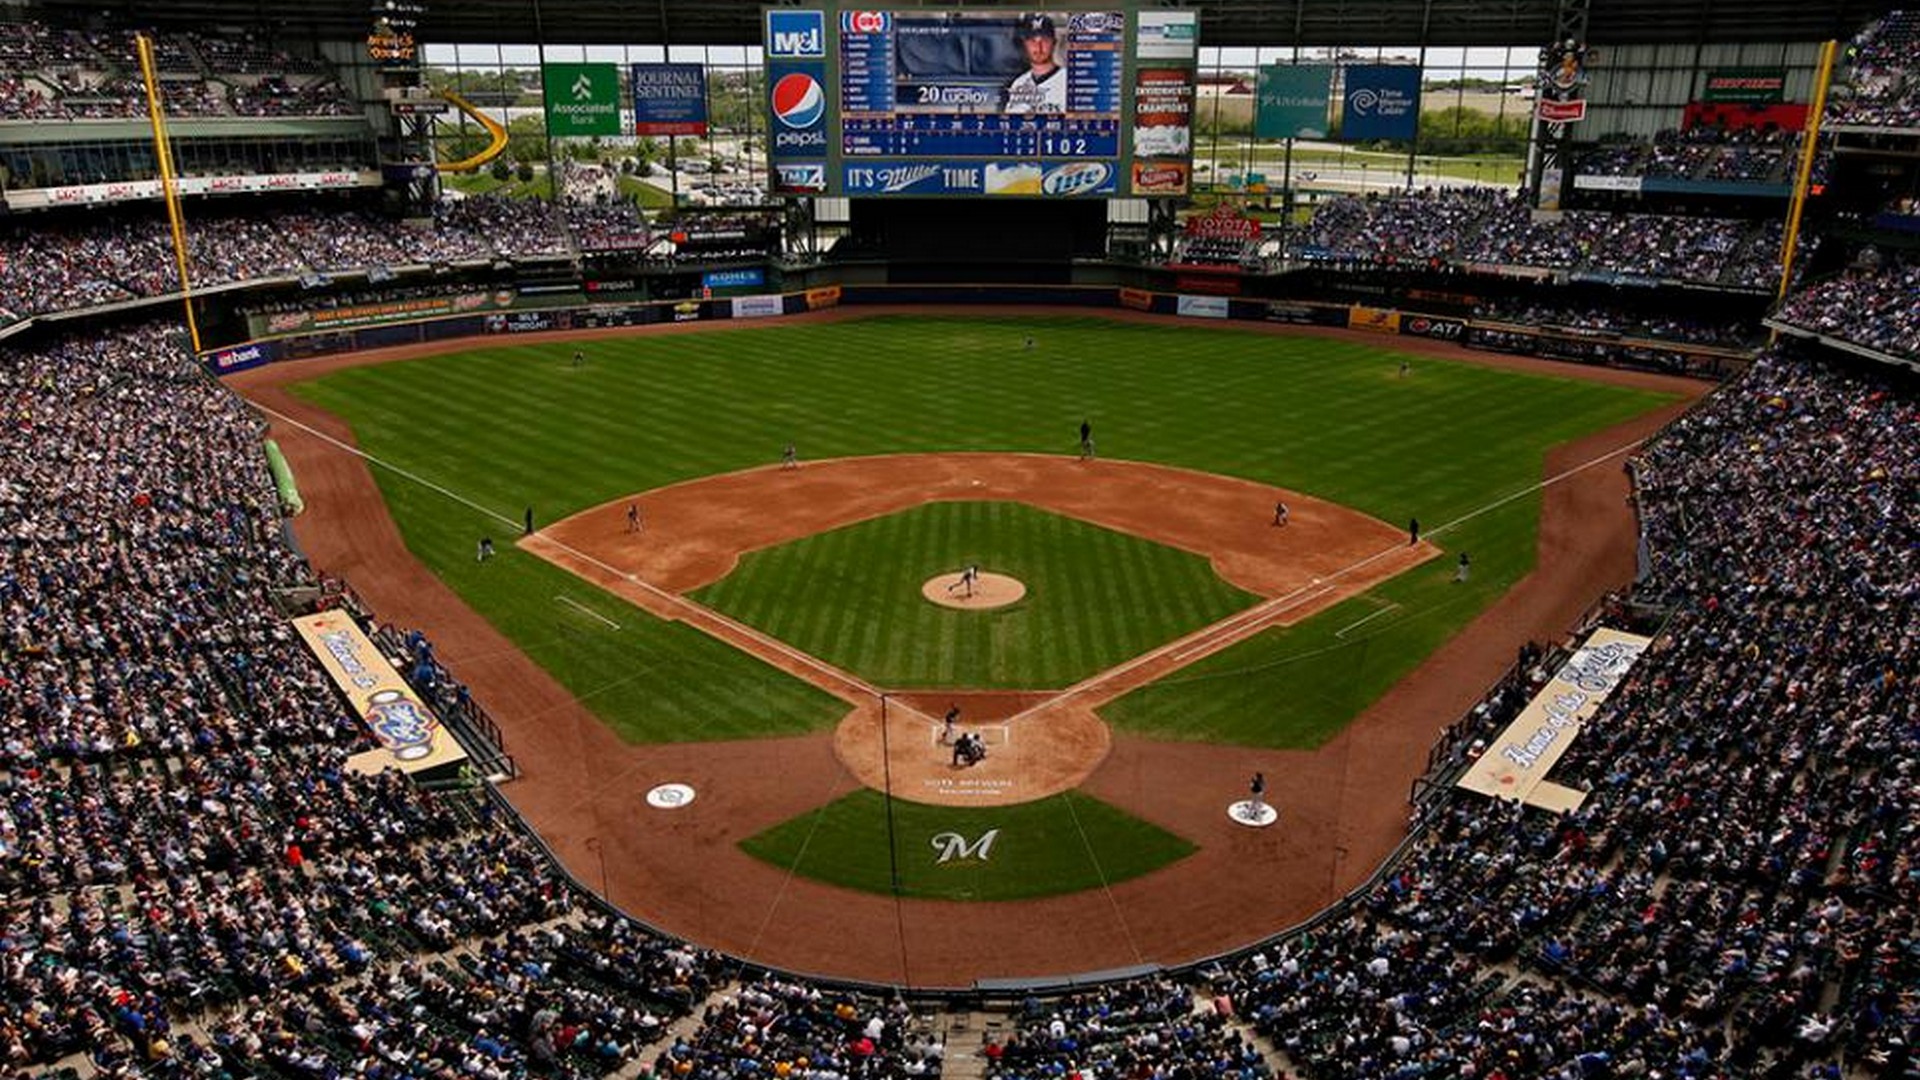 Milwaukee Brewers Stadium Wallpaper With high-resolution 1920X1080 pixel. You can use this wallpaper for Mac Desktop Wallpaper, Laptop Screensavers, Android Wallpapers, Tablet or iPhone Home Screen and another mobile phone device